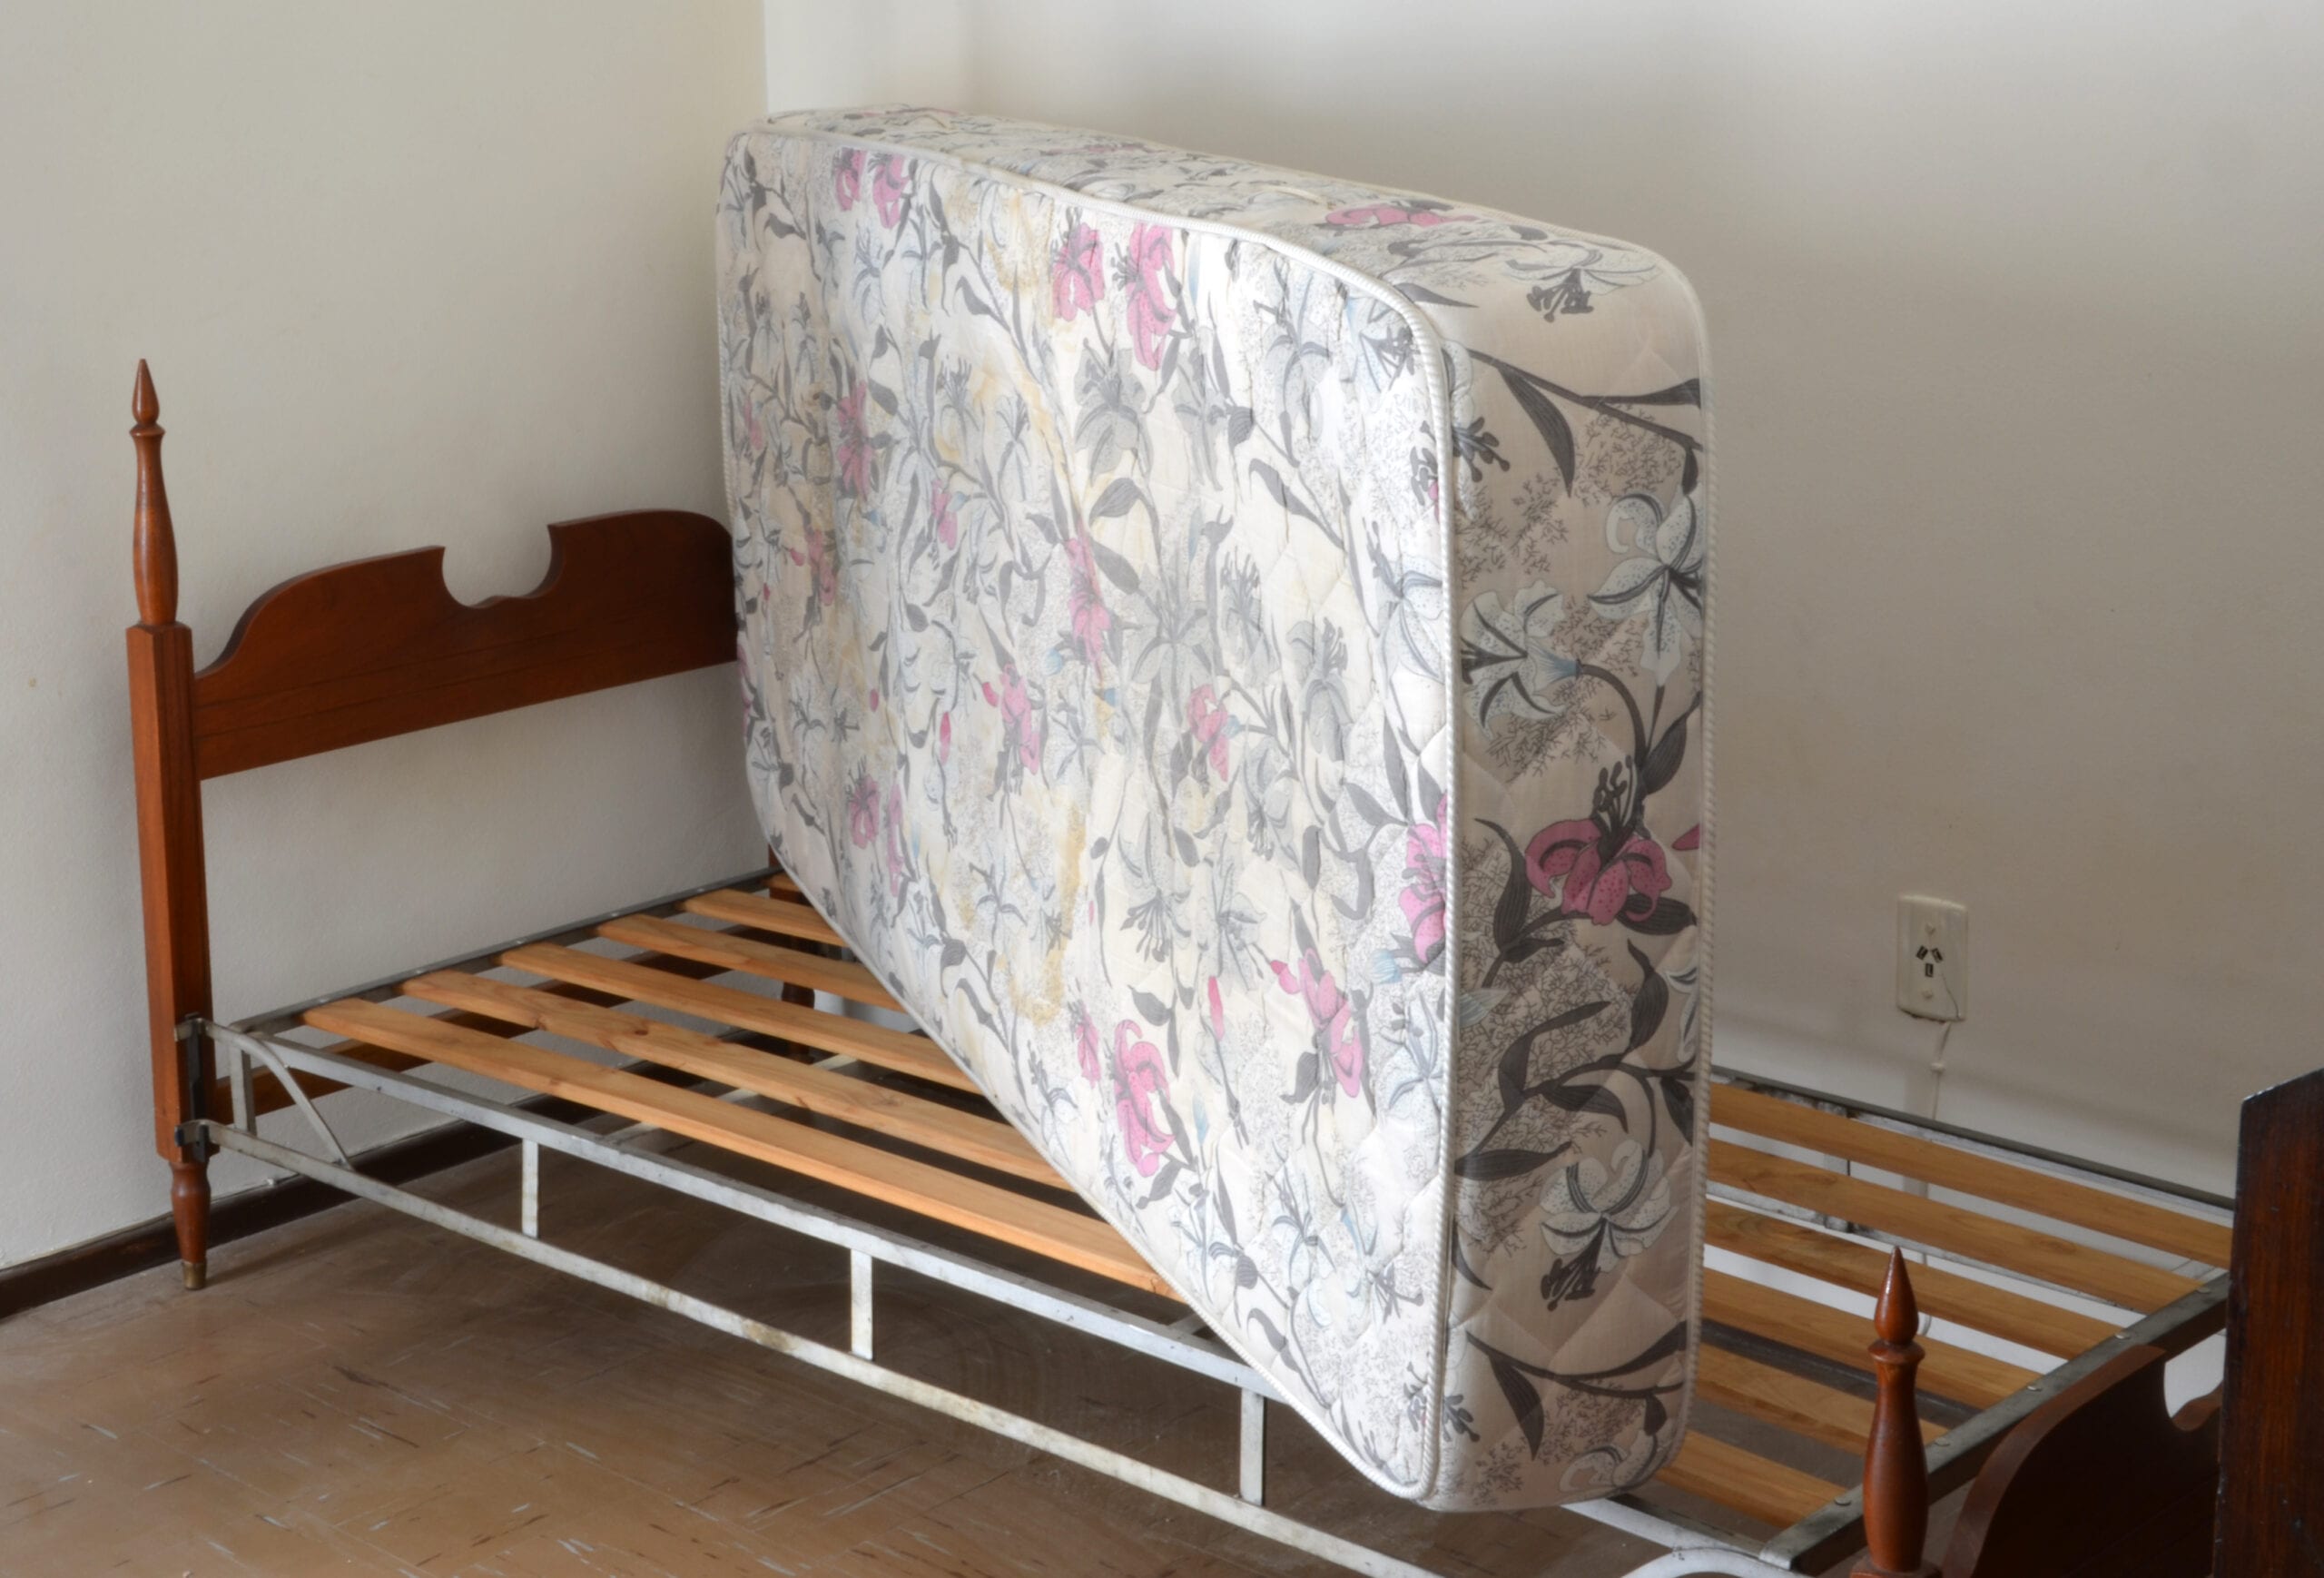 How To Get Rid Of An Old Mattress, Get Rid Of Old Bed Frame